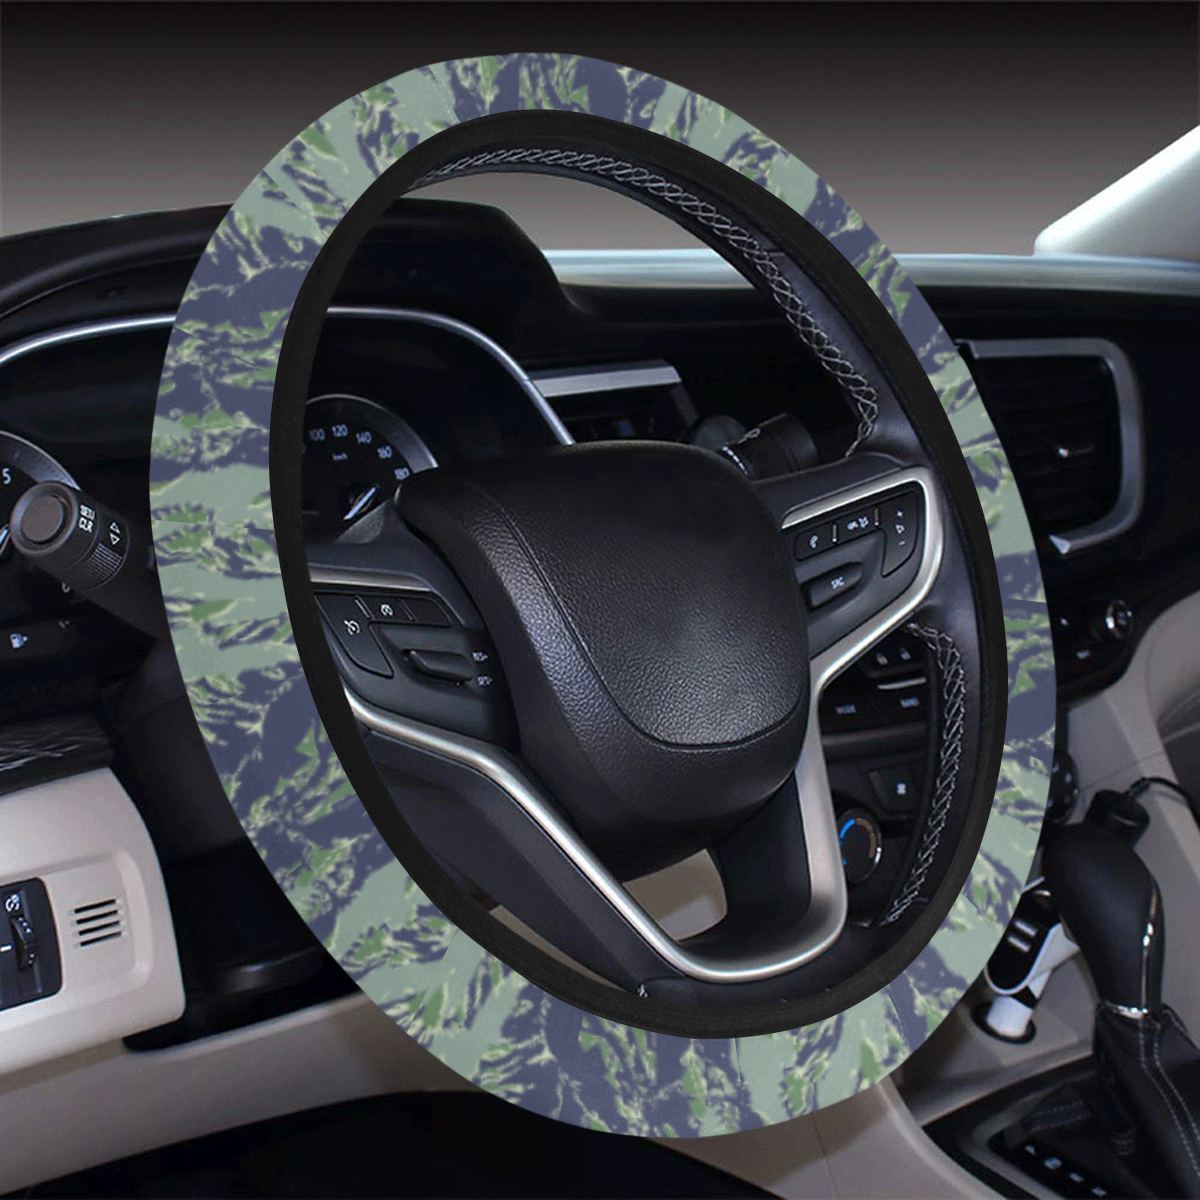 Jungle Tiger Stripe Green Camouflage Steering Wheel Cover with Elastic Edge